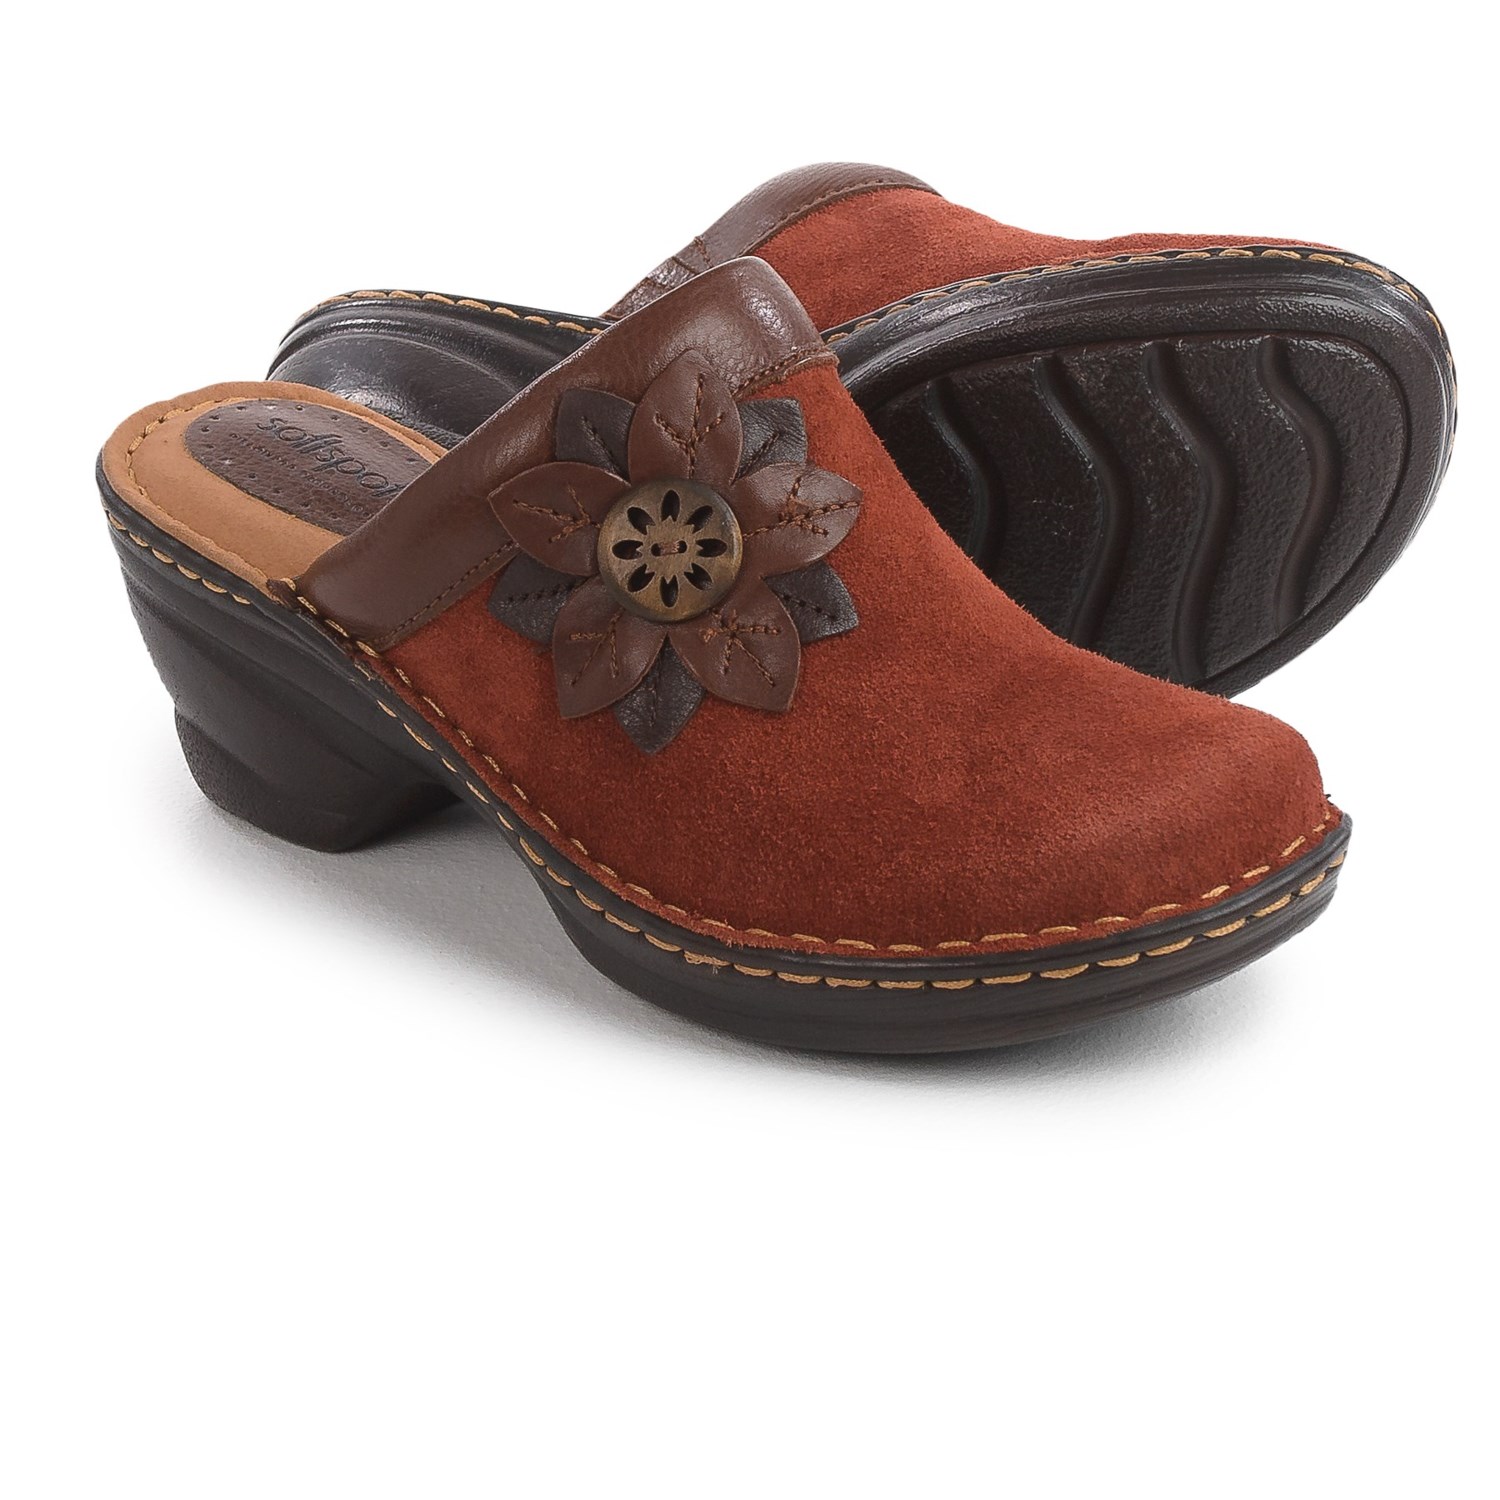 Softspots Lara Clogs – Leather (For Women)